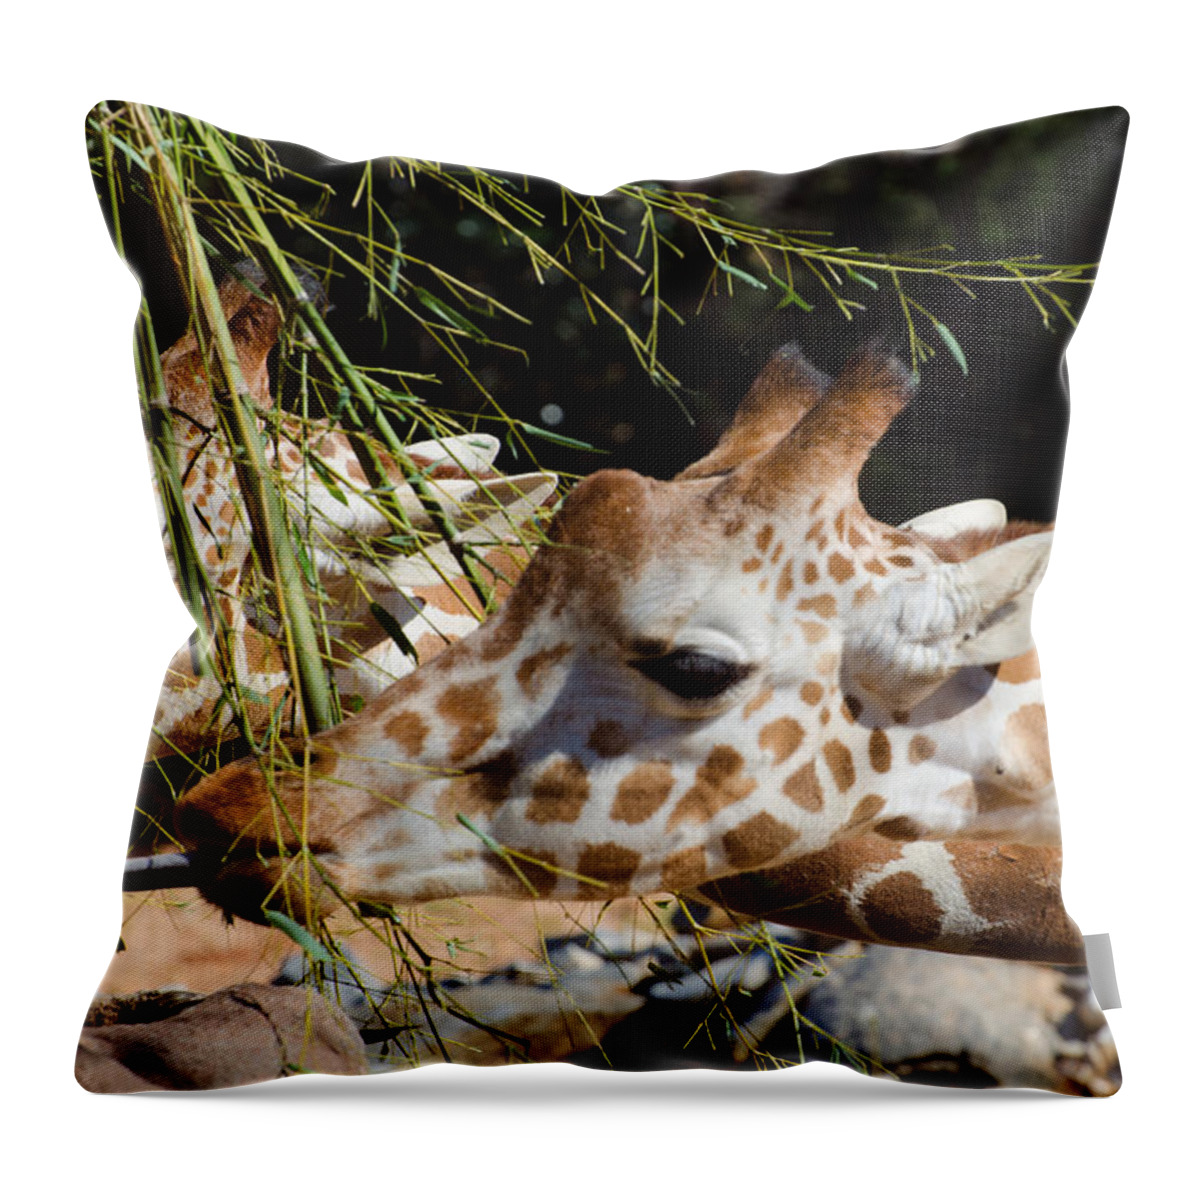 Giraffe Throw Pillow featuring the photograph Gentle Beauty by Donna Brown